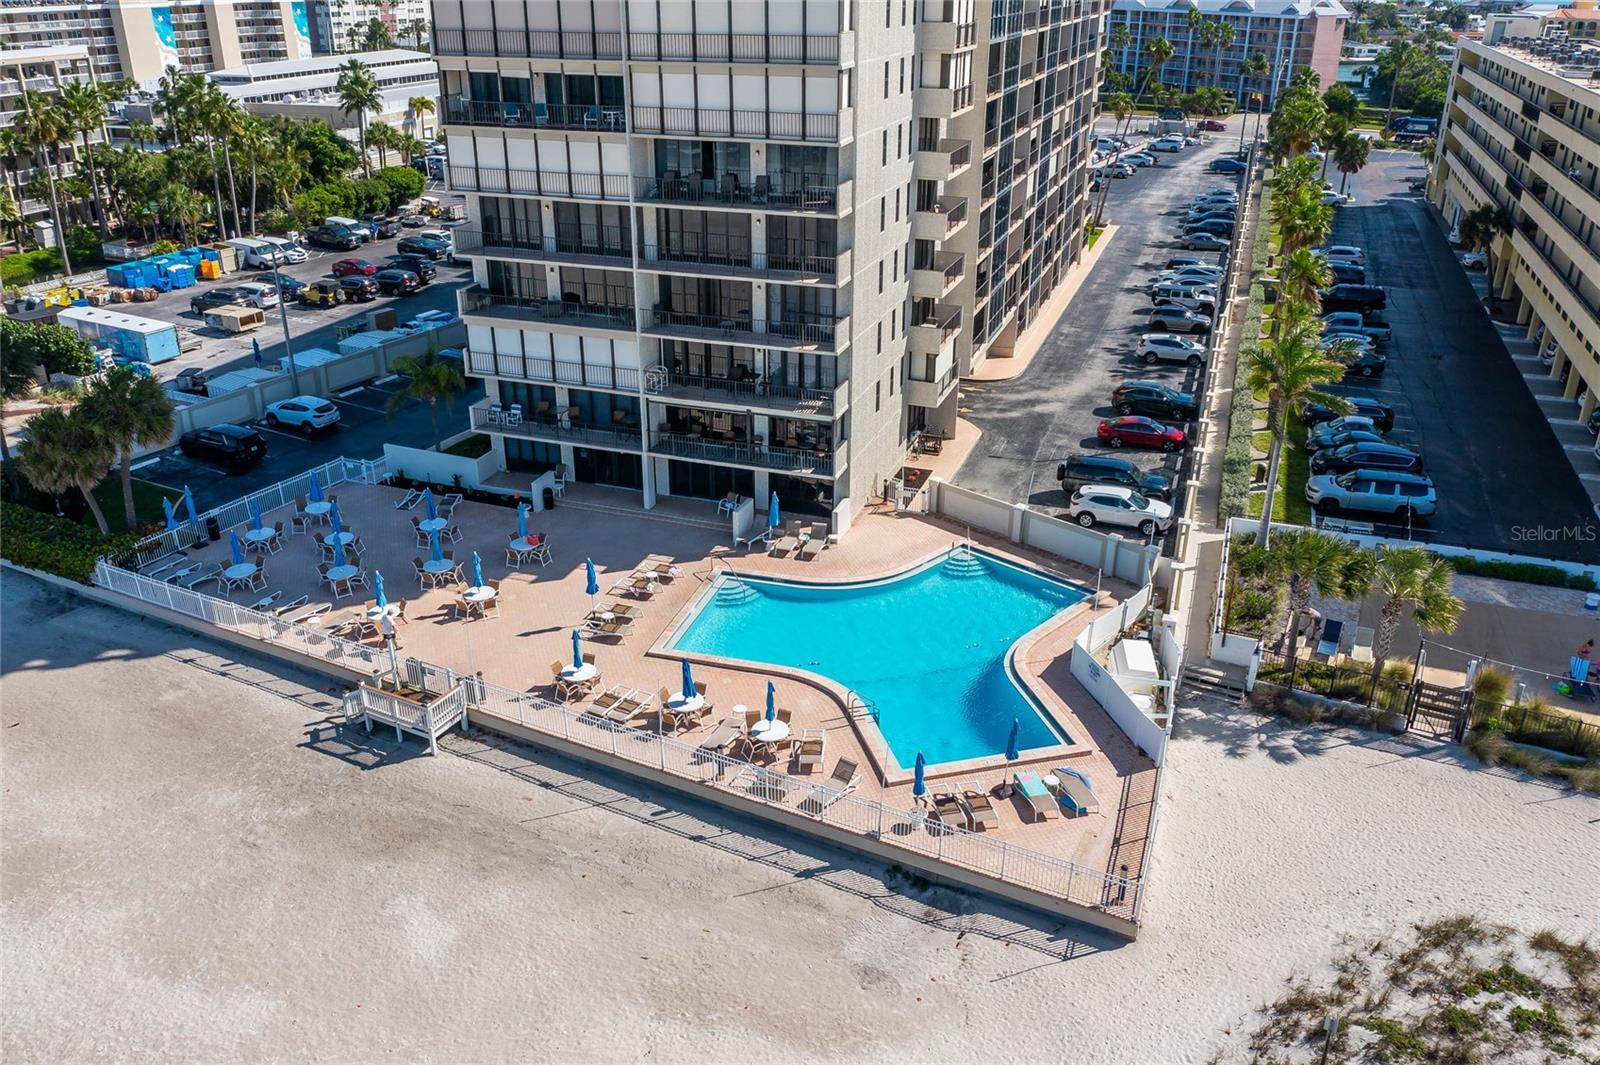 Seamark has a fantastic pool deck with trademark pool overlooking the Gulf of Mexico.